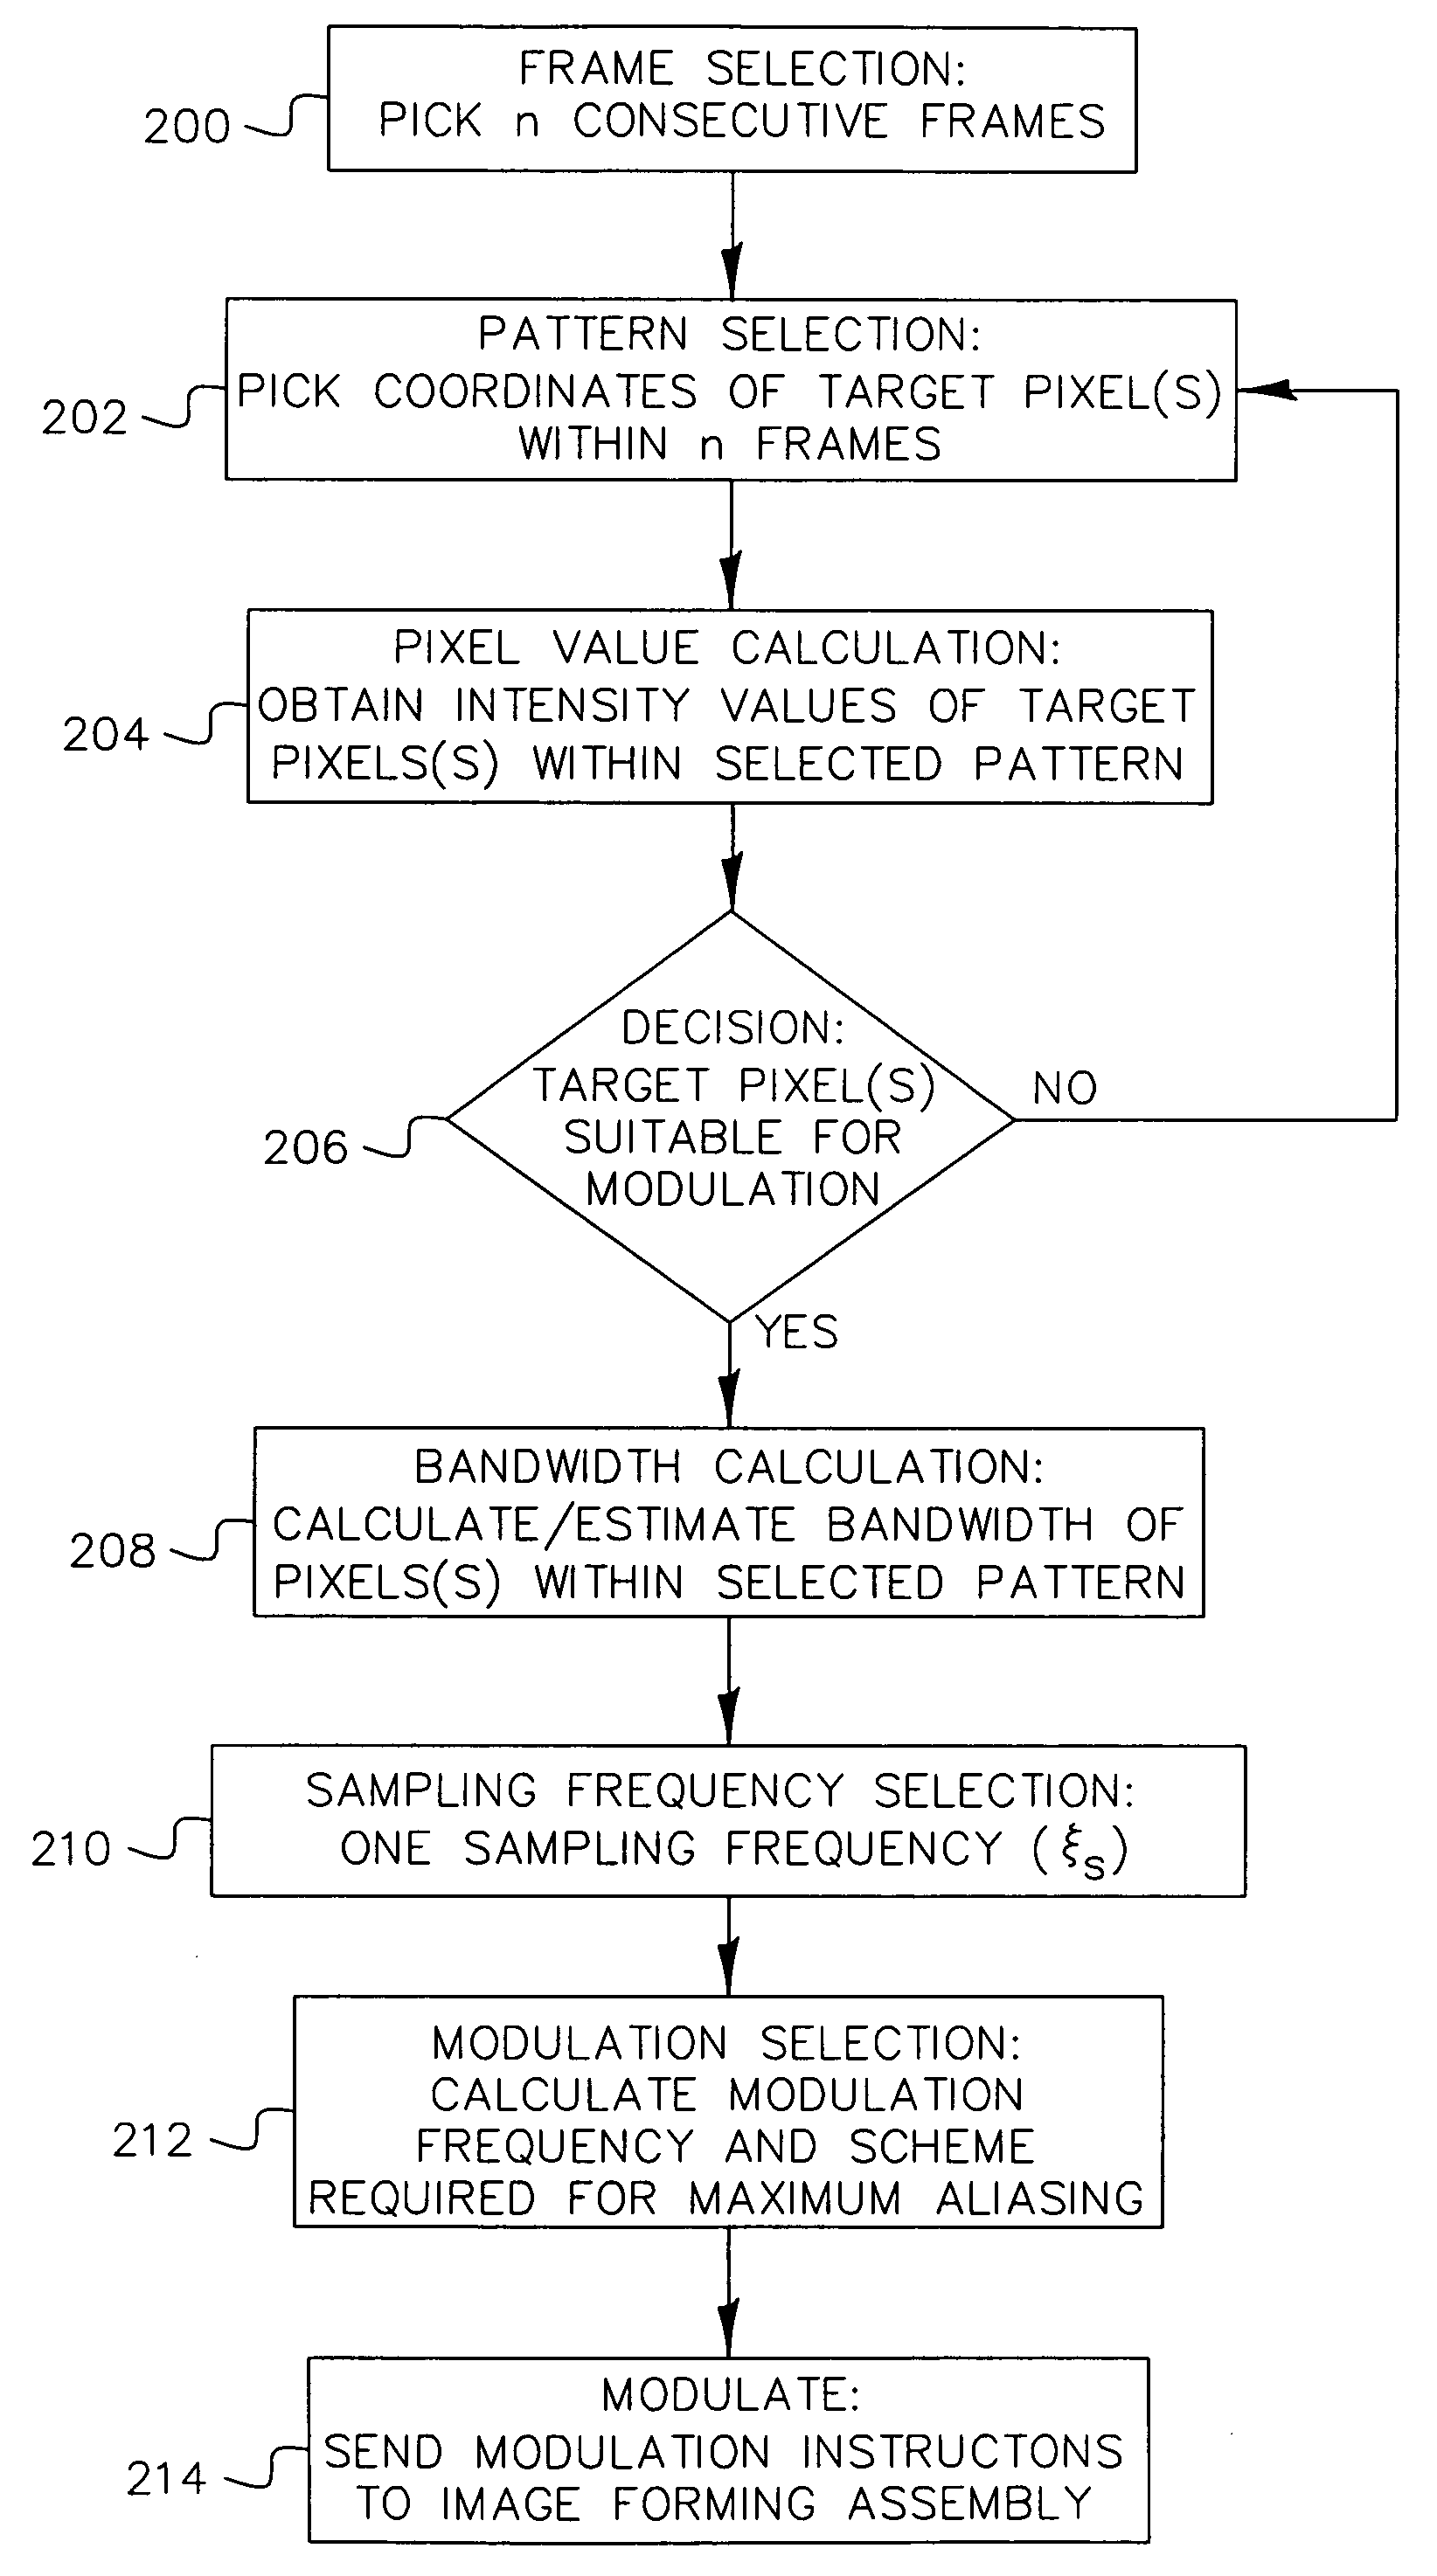 Copy protection for digital motion picture image data